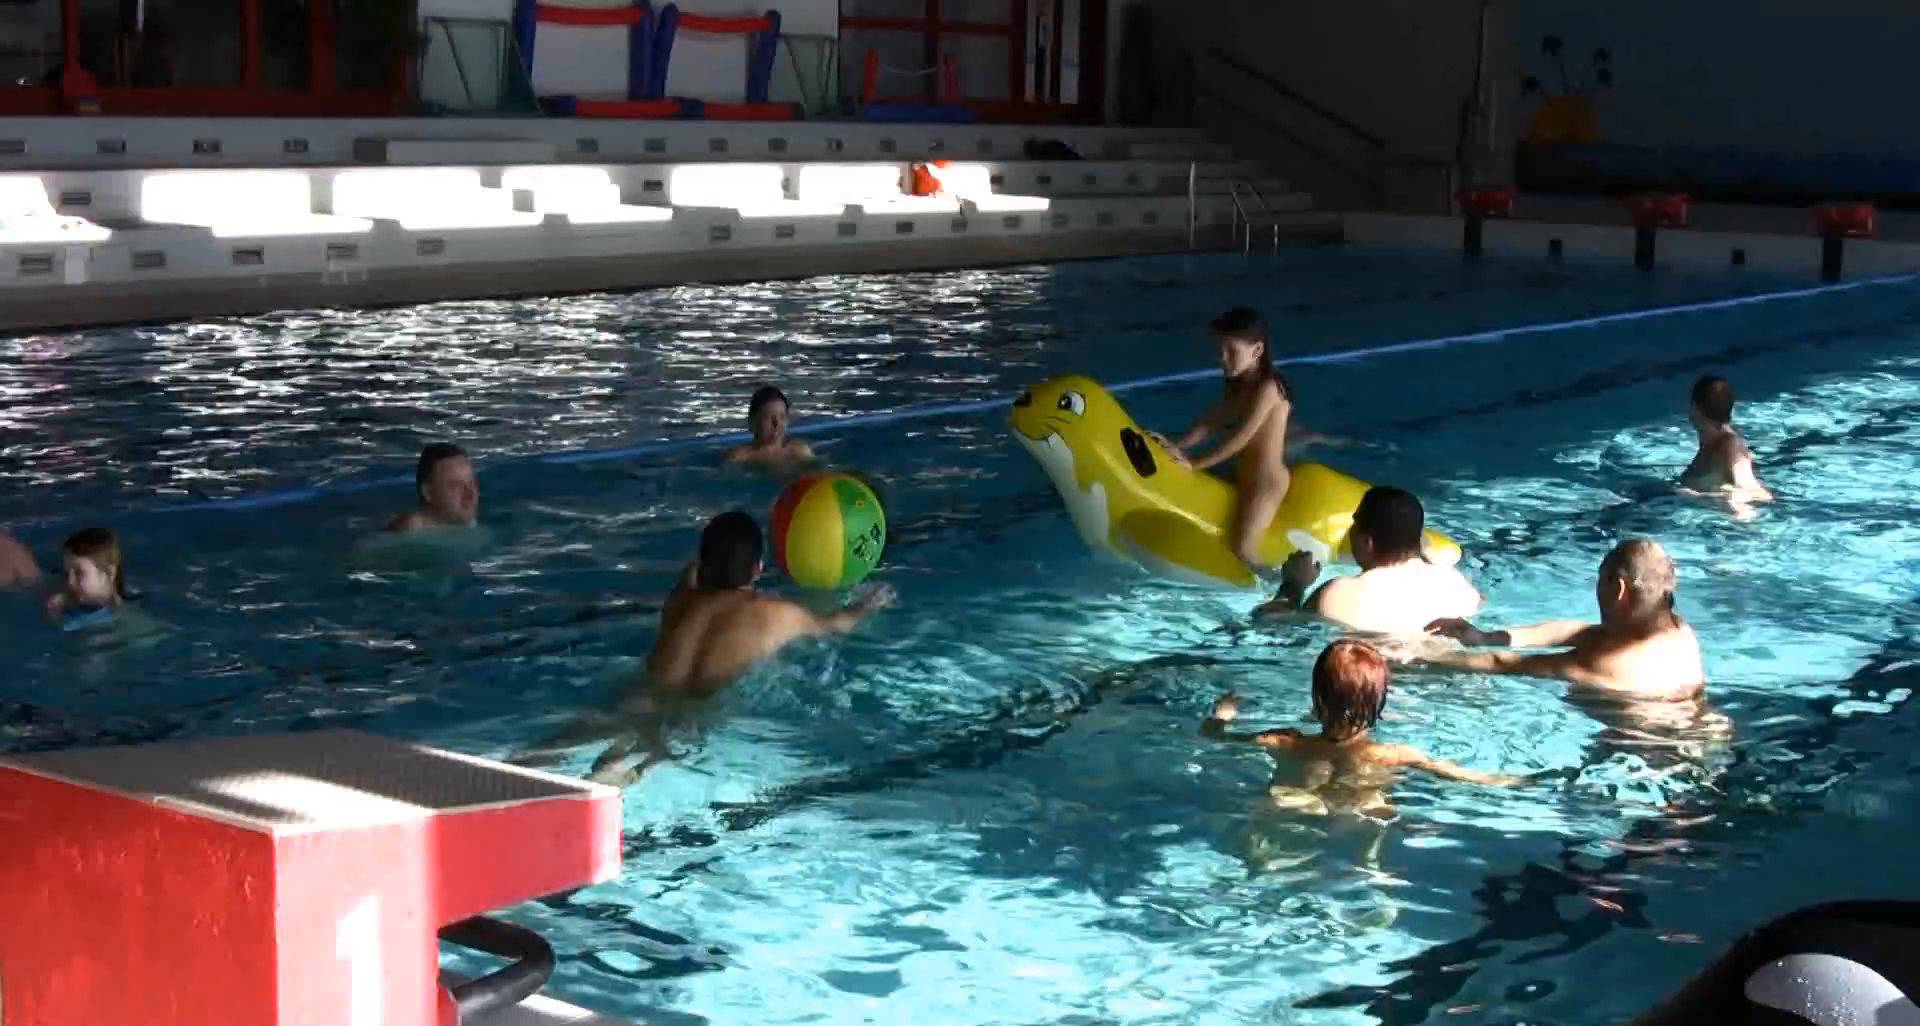 Purenudism Videos-Floating On Our Rafts 2 - 2